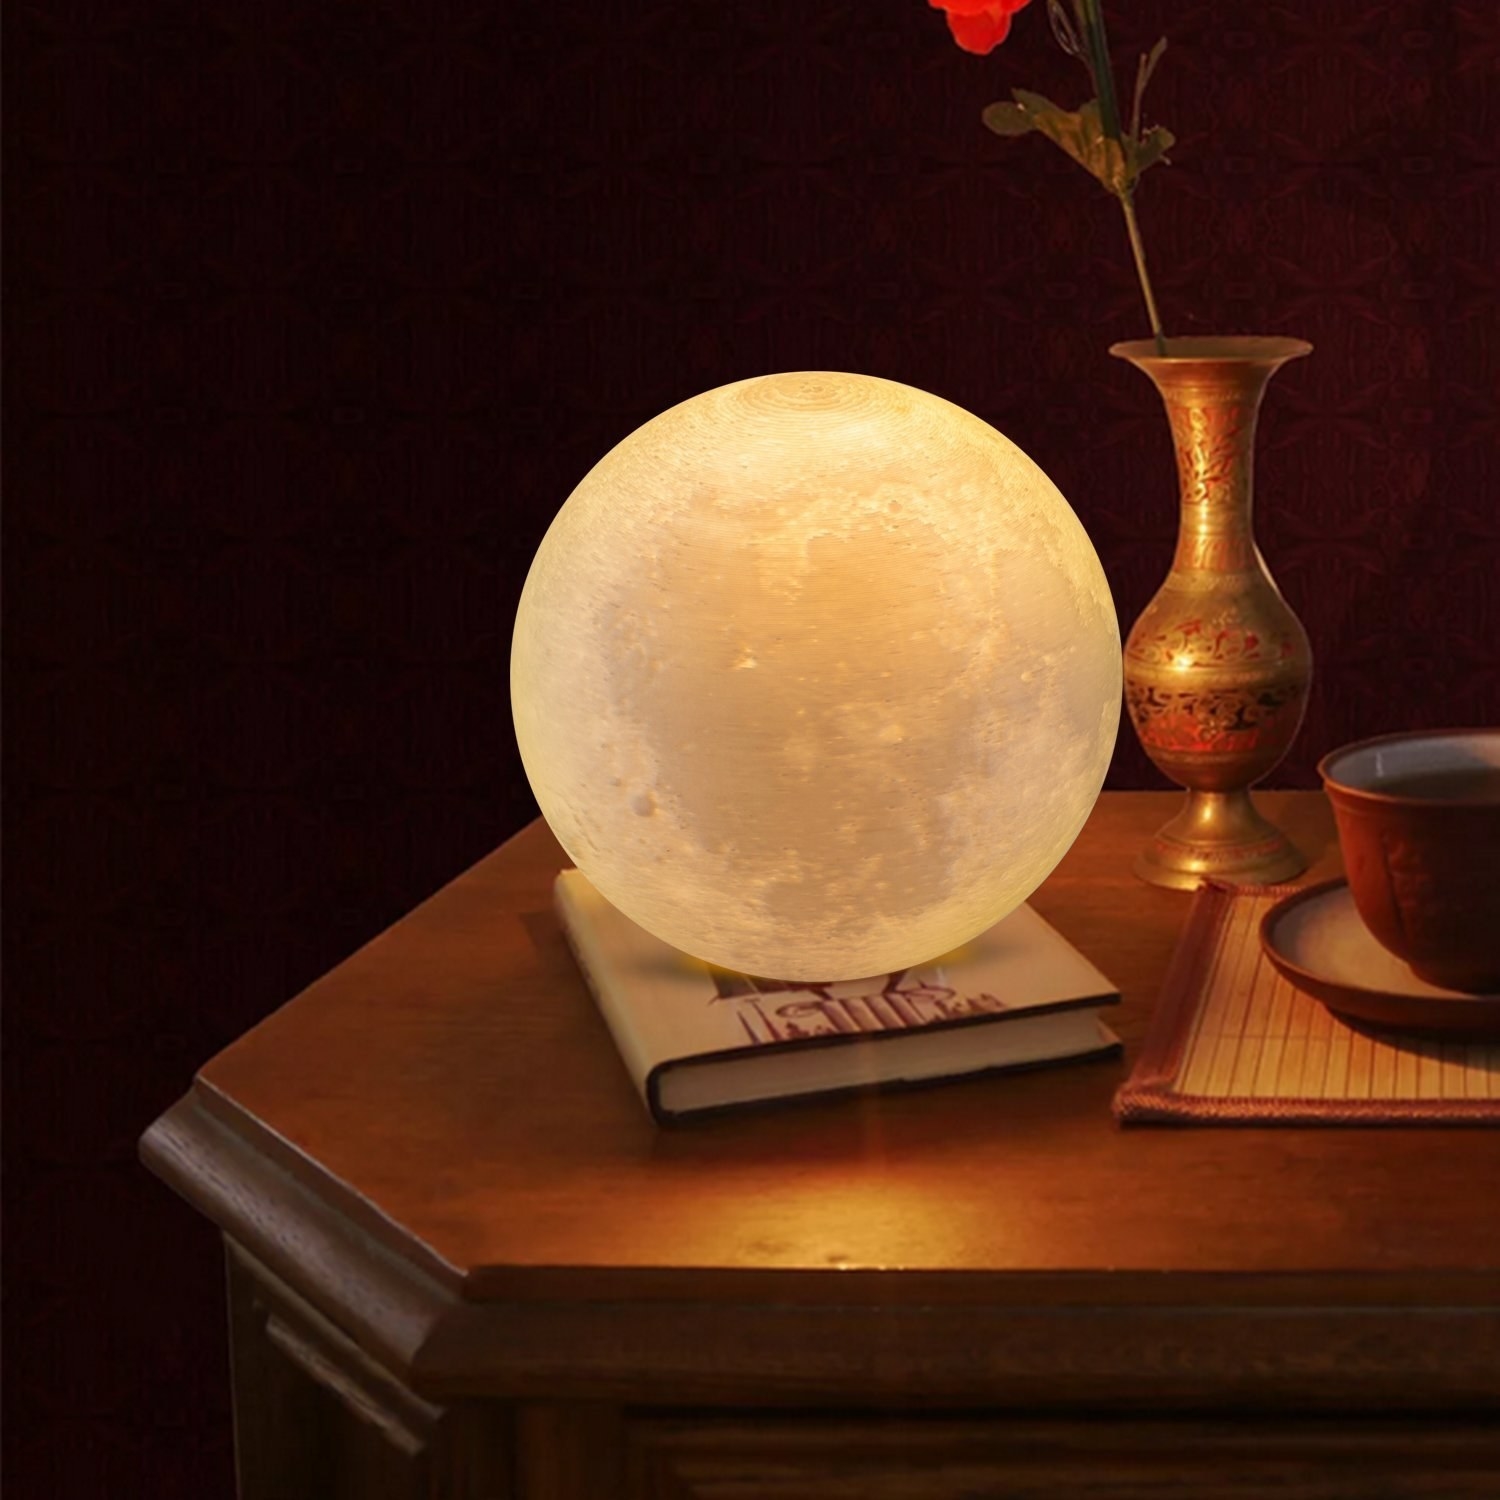 A round lamp that looks like the moon is placed on a bedside table